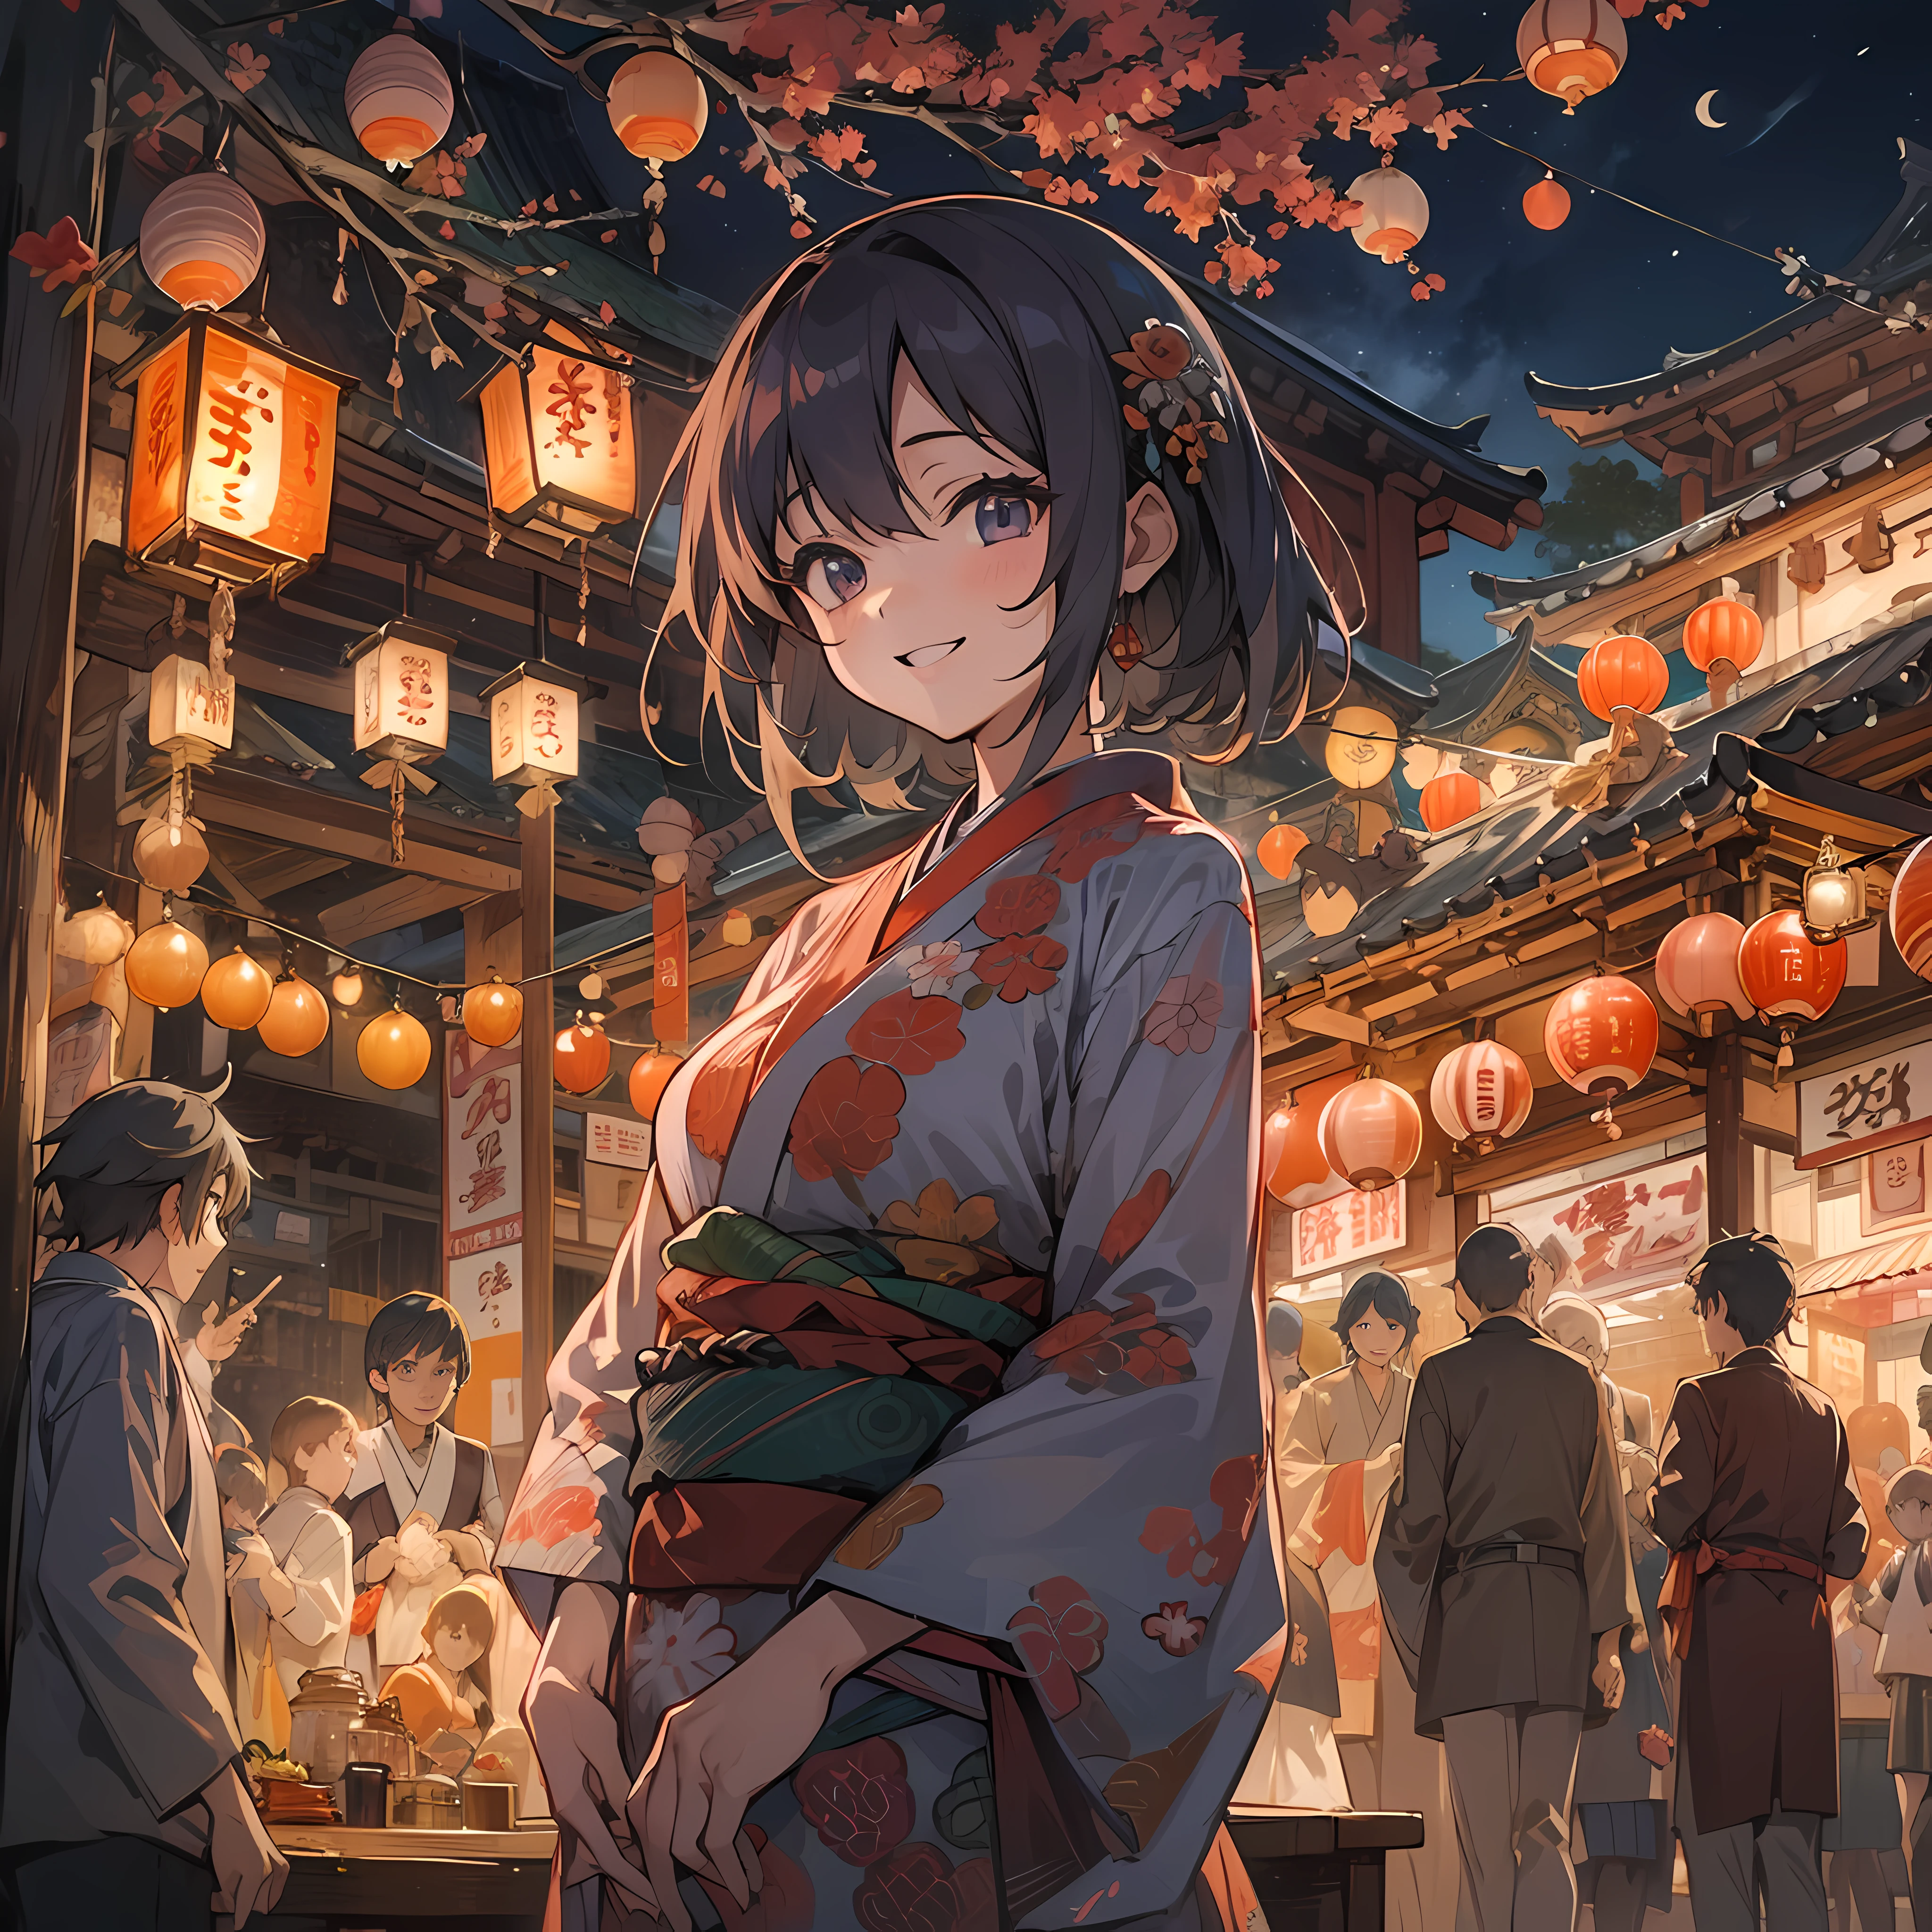 masutepiece, Best Quality, Extremely detailed, Anime, girl, Full body, Japanese style, Night, Smile, Happy, Temple Festival, Night Stall